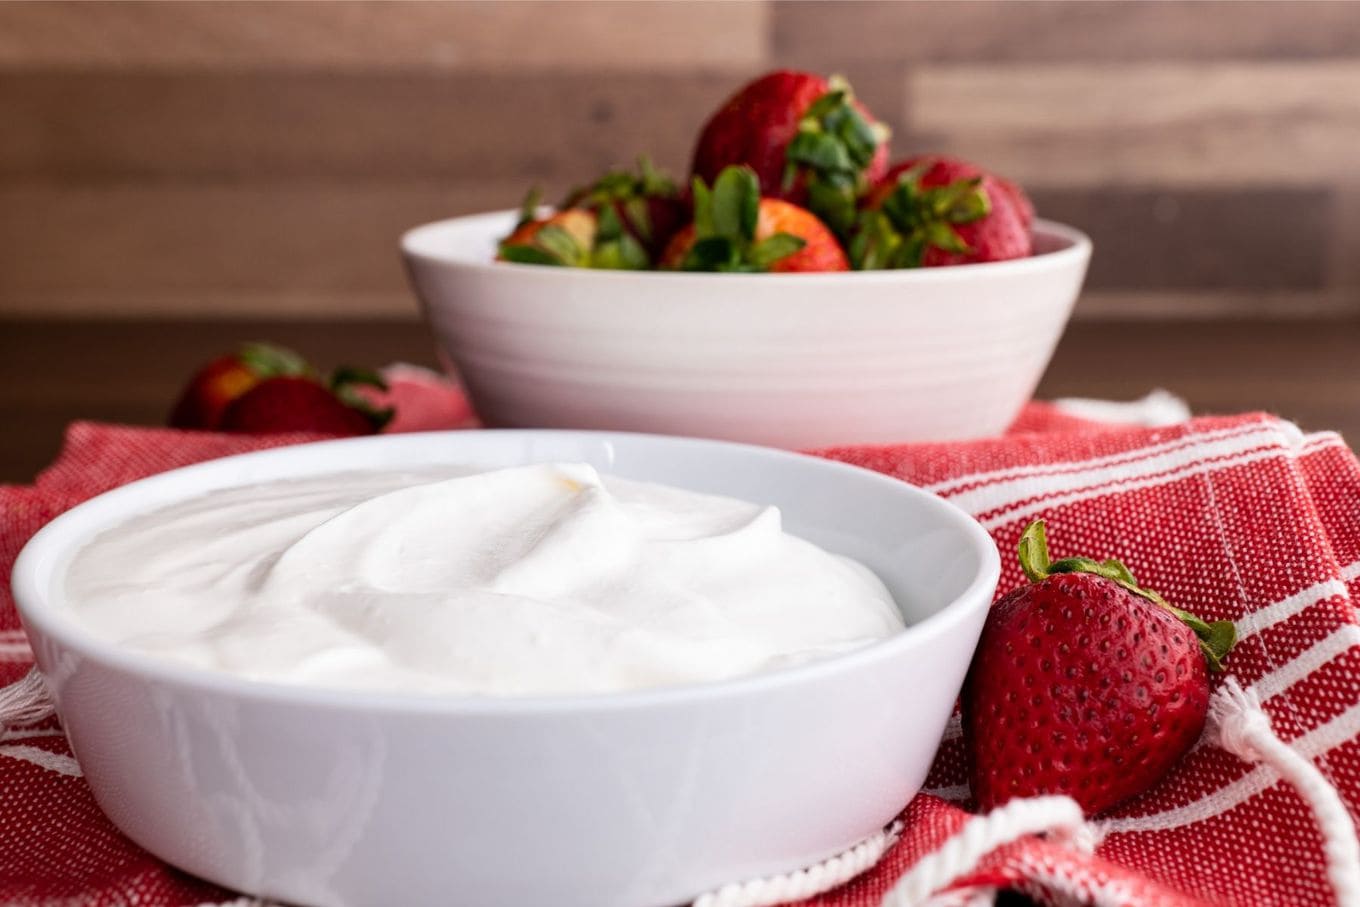 Homemade Cool Whip in bowl with strawberries served